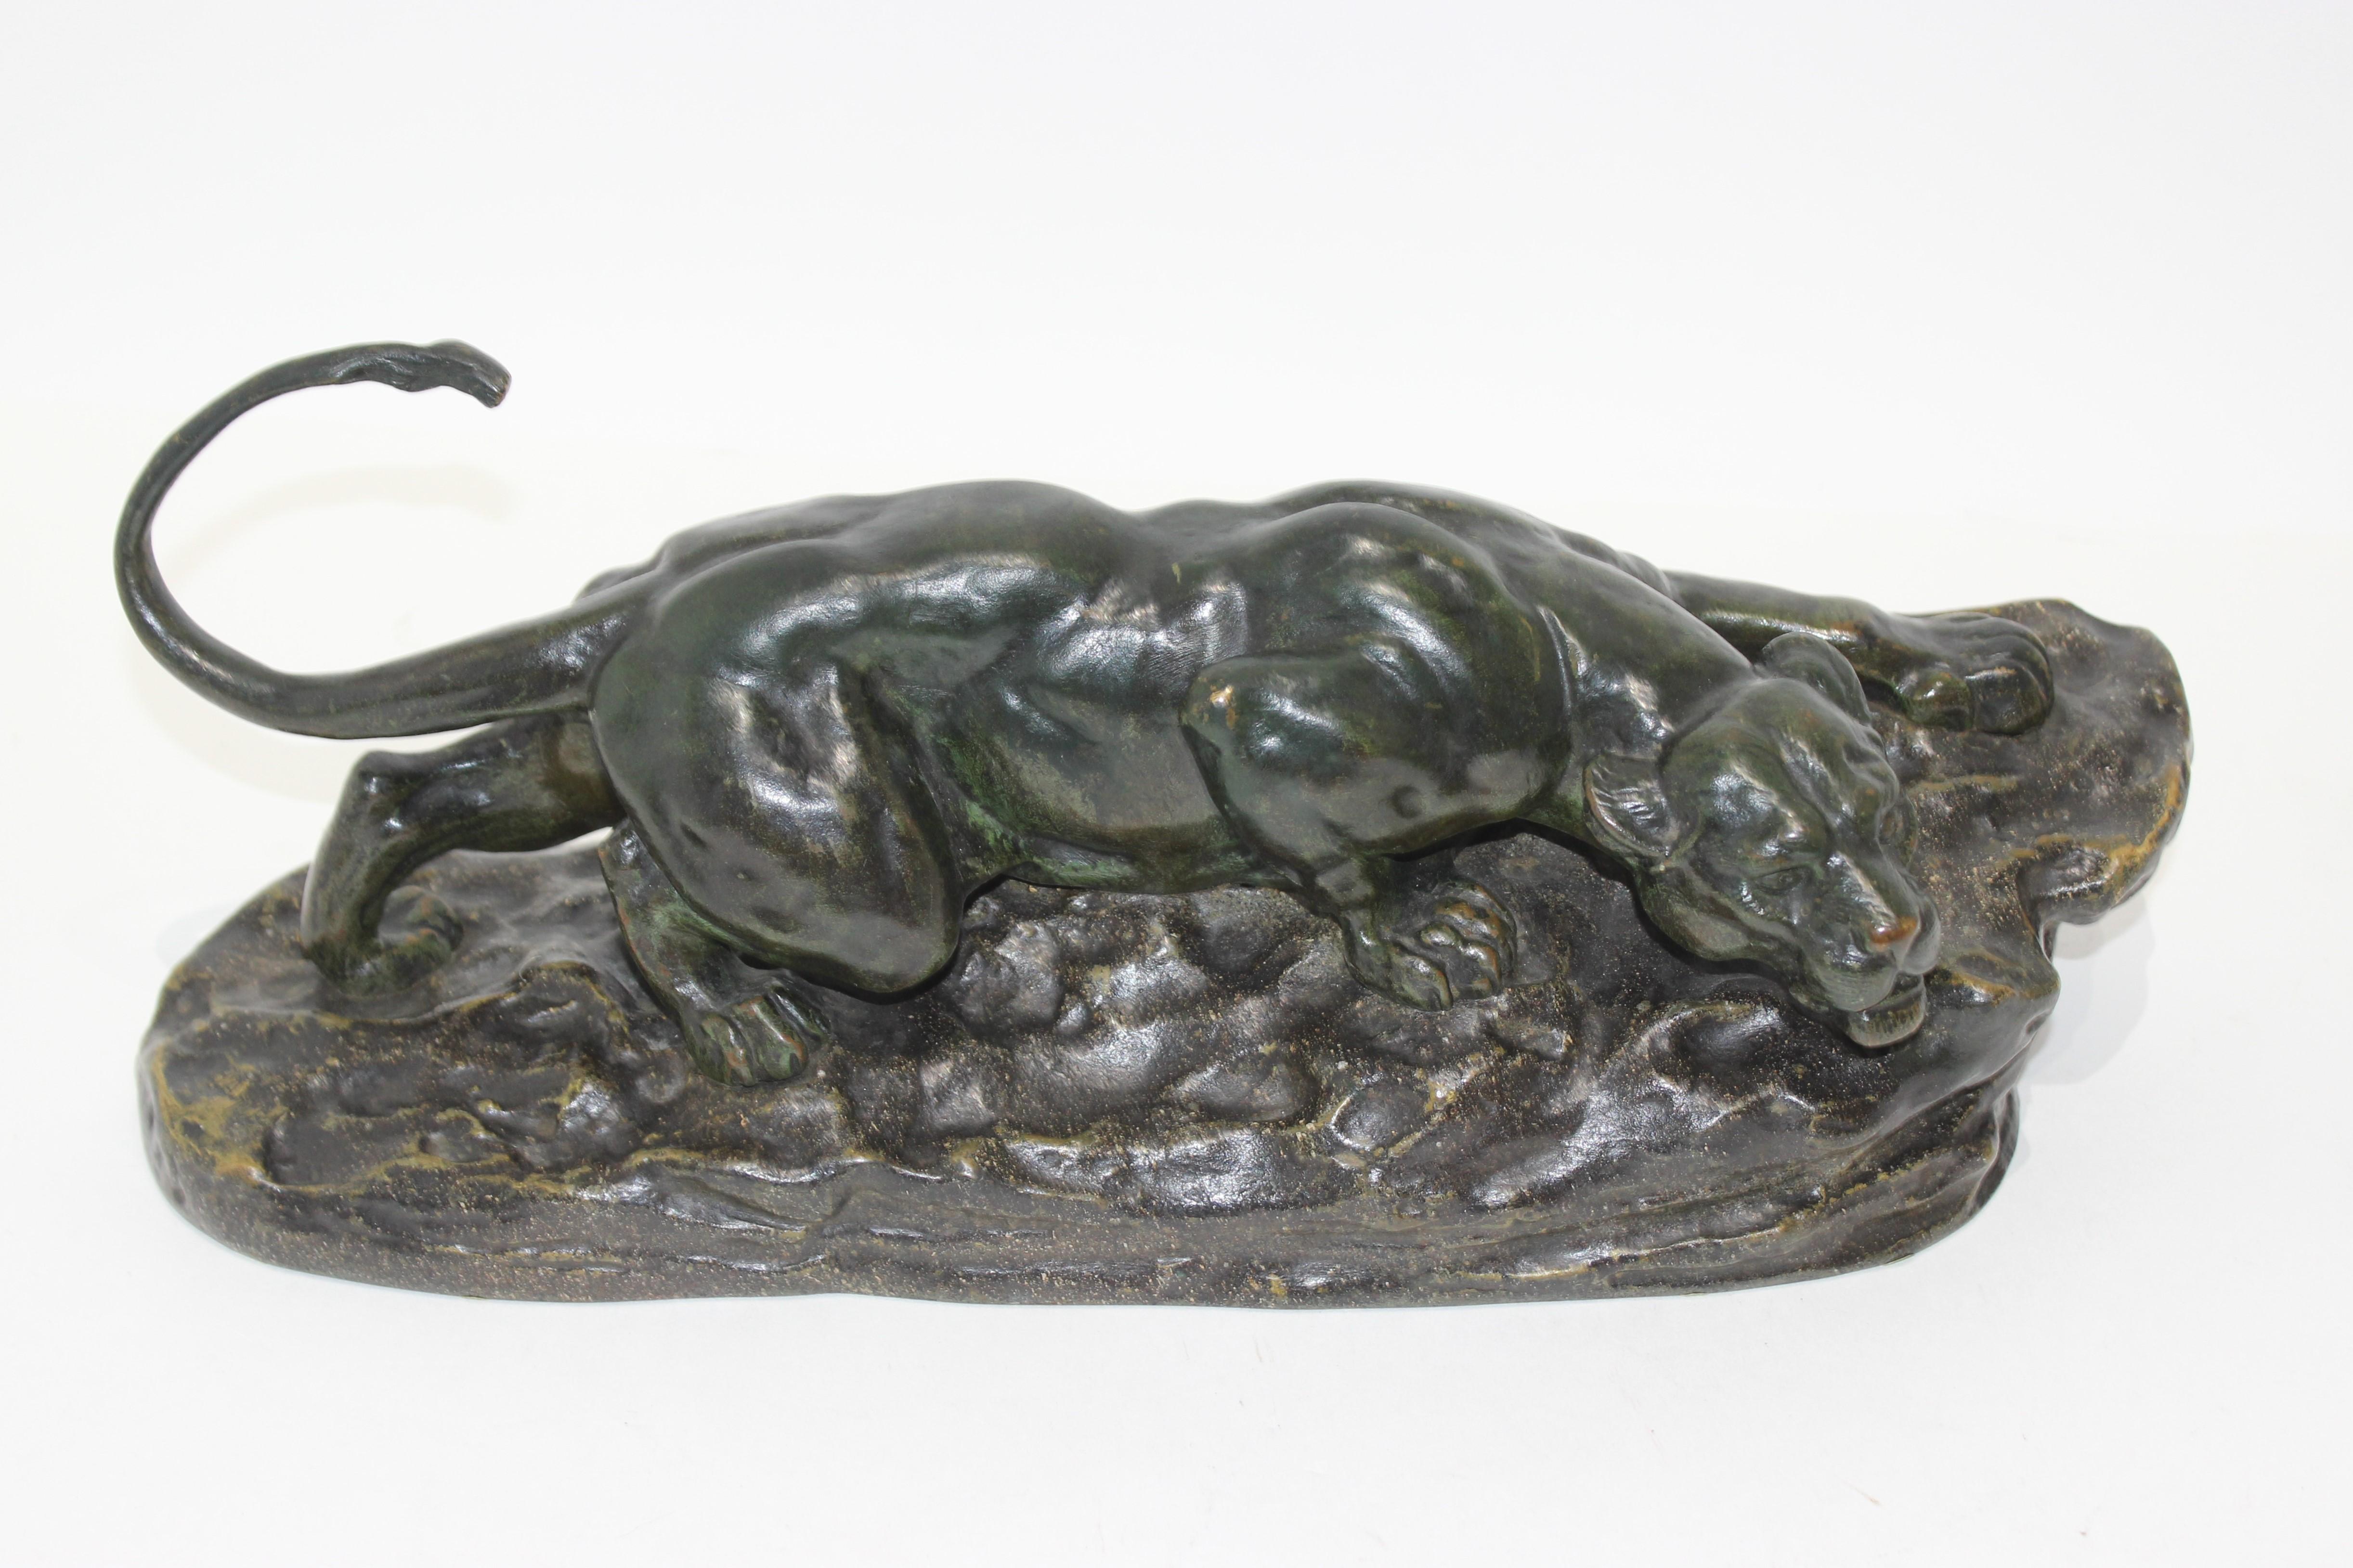 Crouching panther bronze signed Bayre from a Palm Beach estate

The tail may exhibit a past repair.